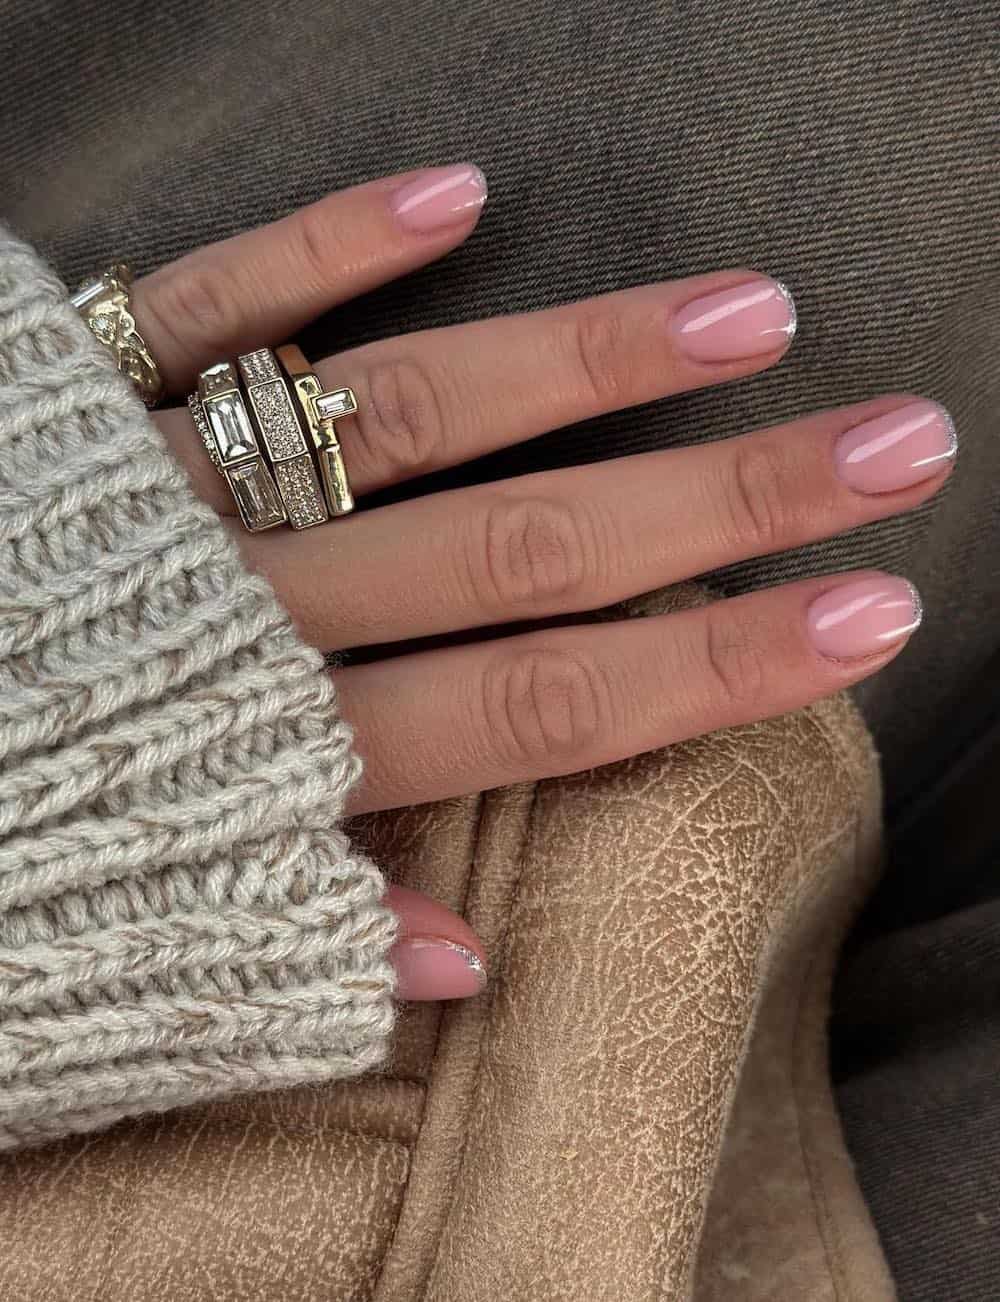 A hand with short squoval nails painted a nude pink with thin silver glitter French tips